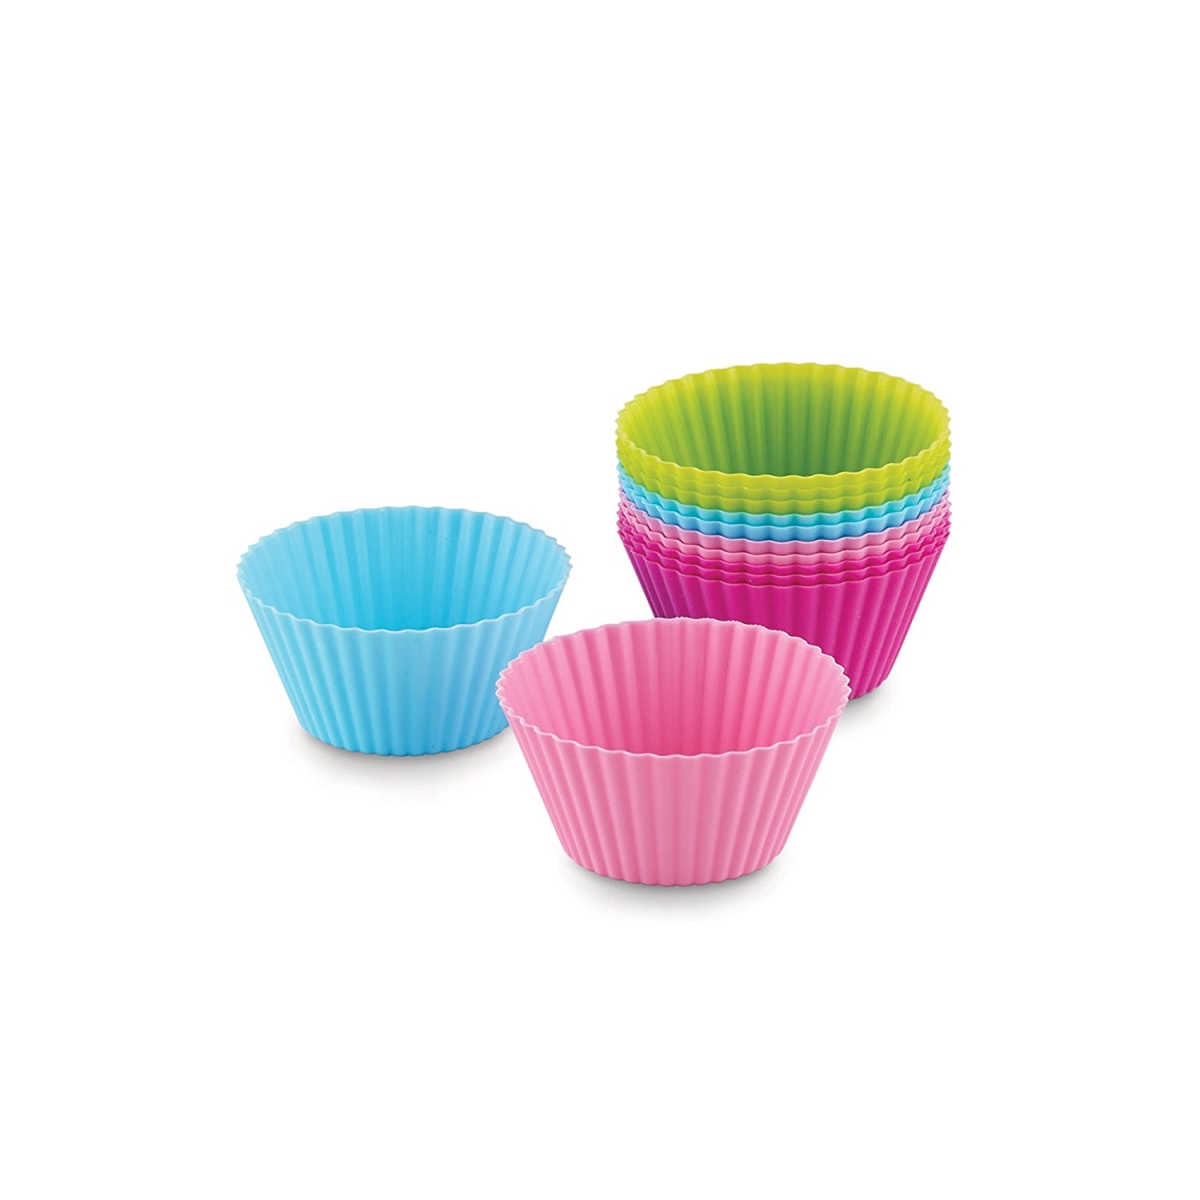 233377 3 In. Silicone Baking Cupcake Liners - 12 Count